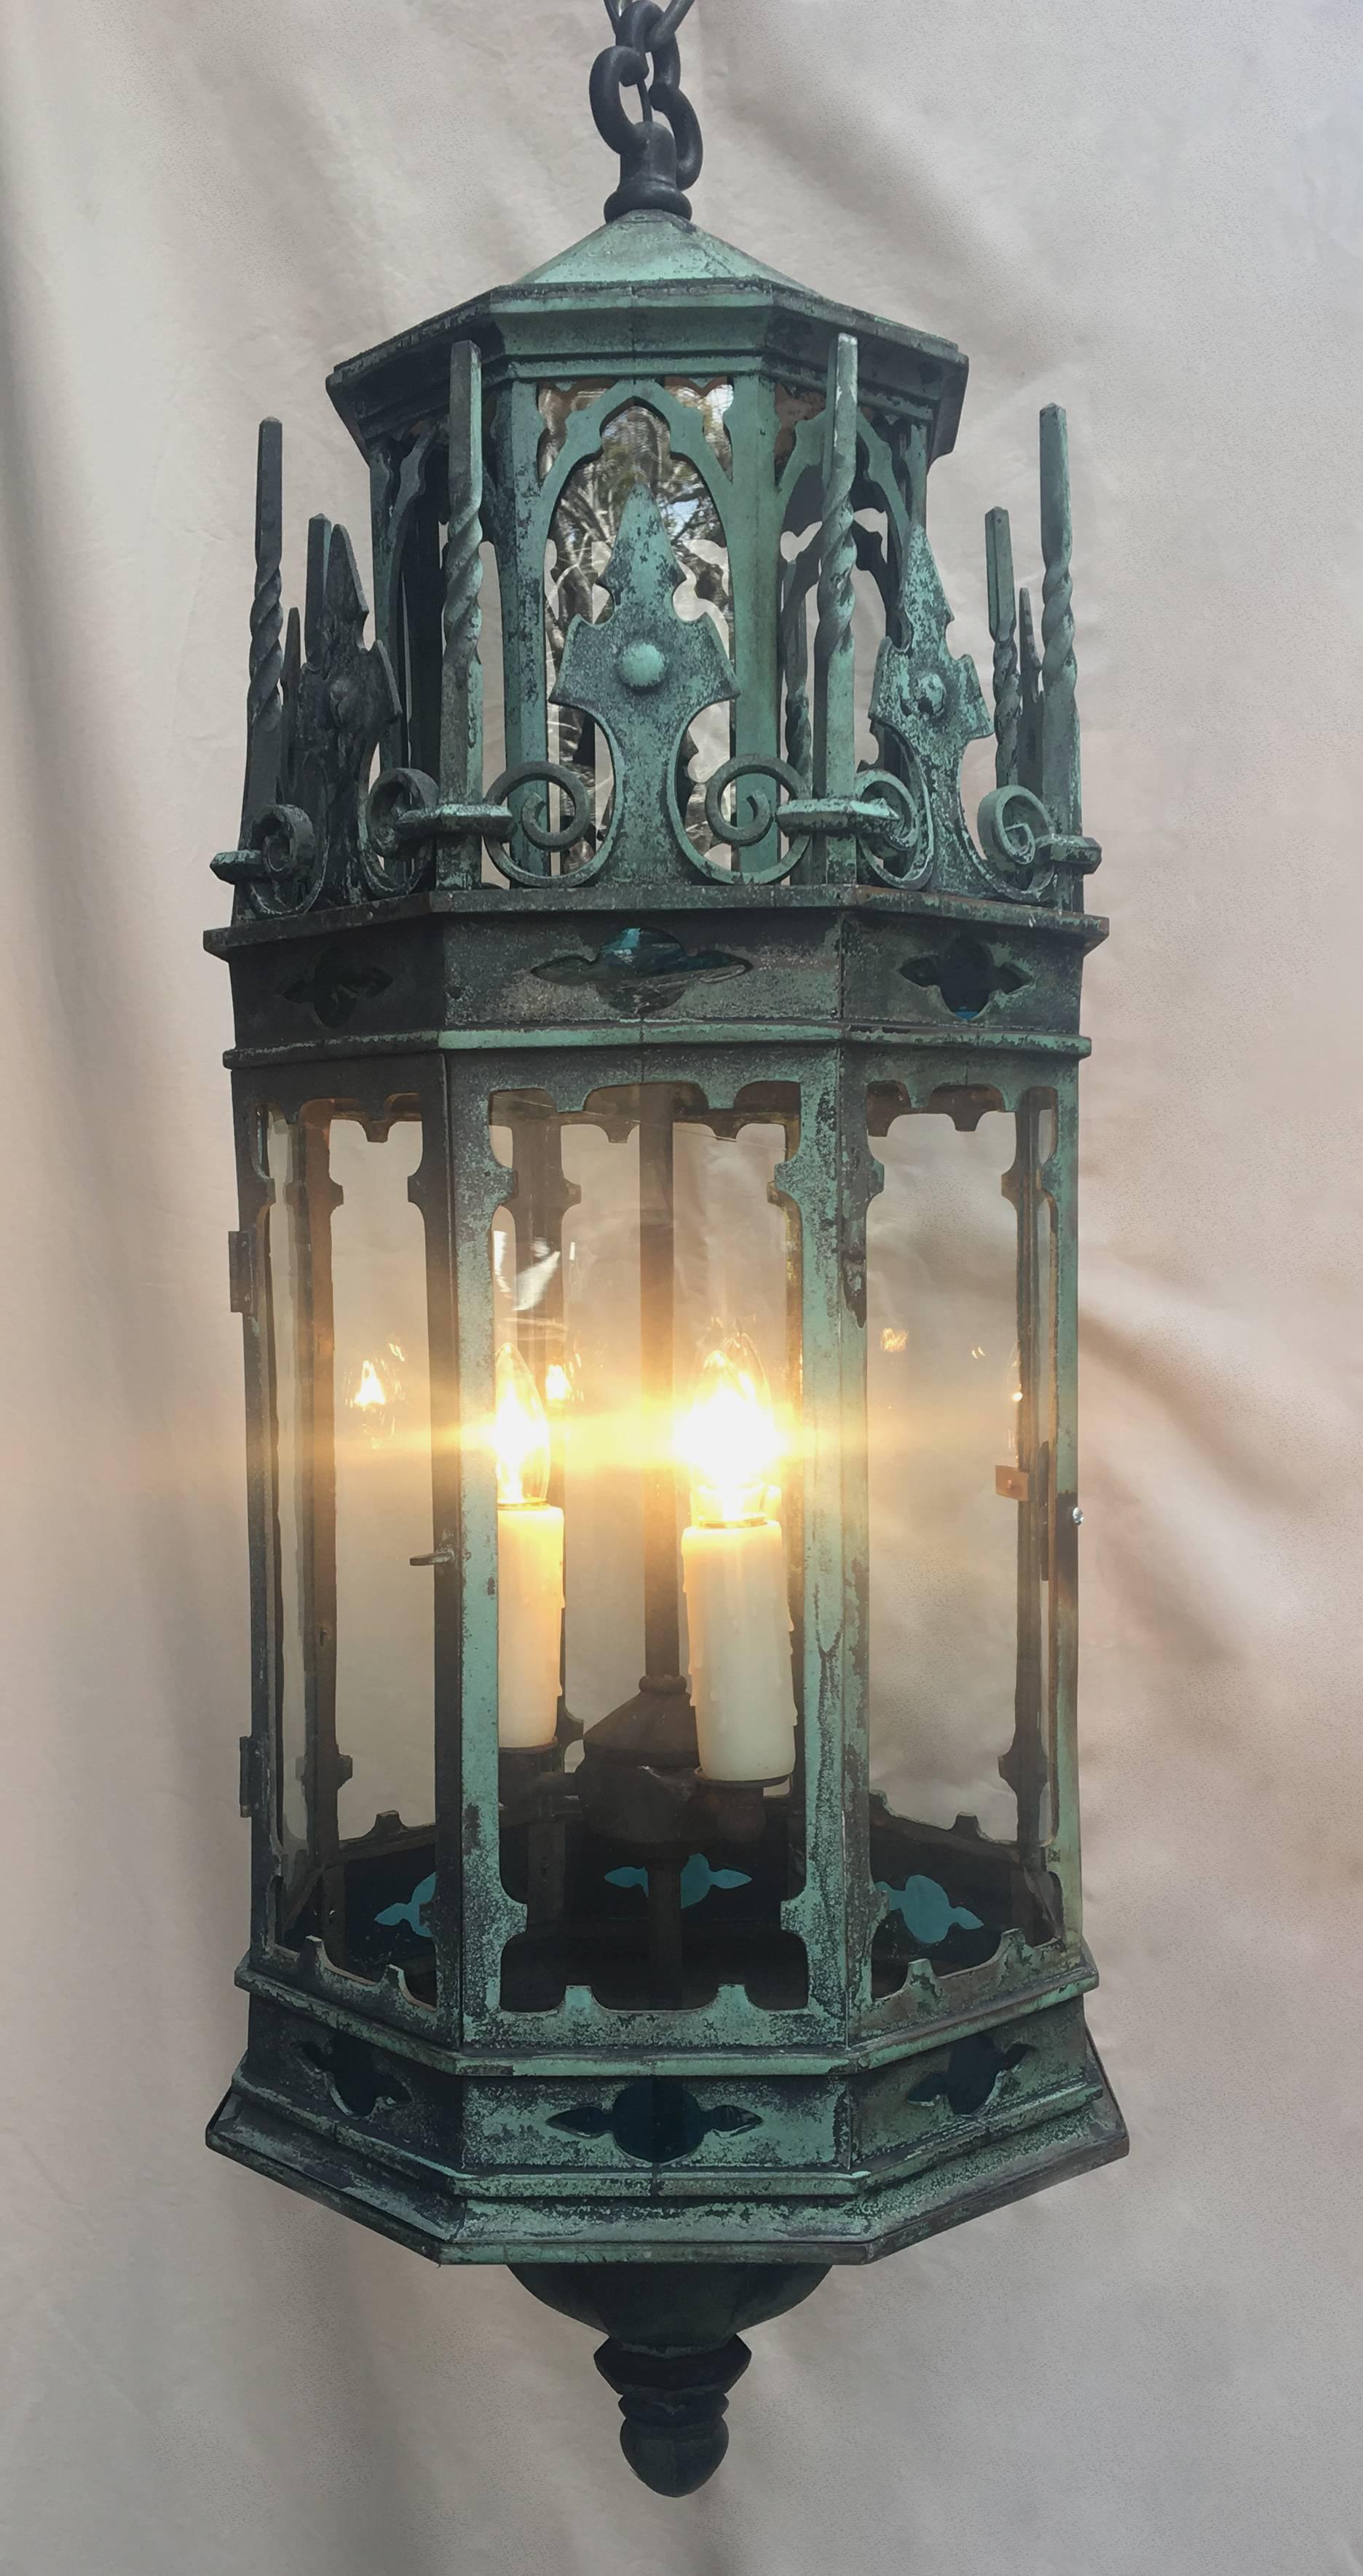 This mid-19th century English Gothic Revival bronze and glass lantern chandelier is accented with turquoise glass. Originally gas, this lantern chandelier has since been rewired and electrified.

Item comes with chain and canopy.